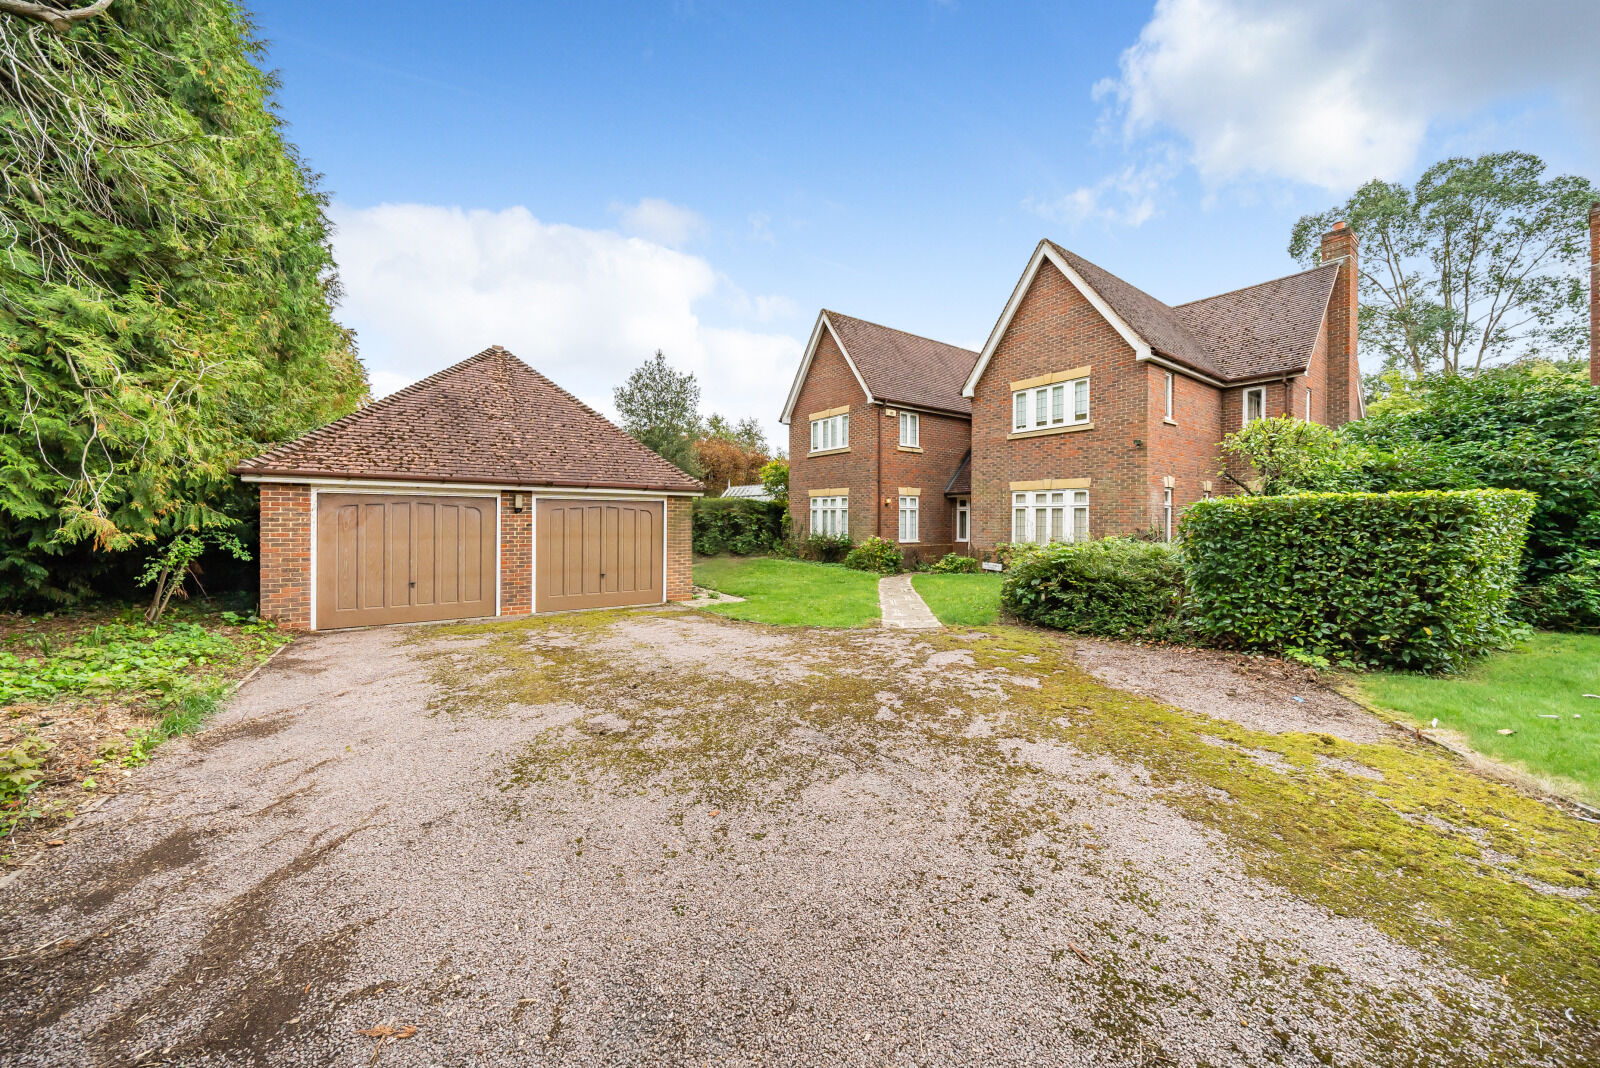 5 bedroom detached house for sale Carlesgill Place, Henley-on-Thames, RG9, main image